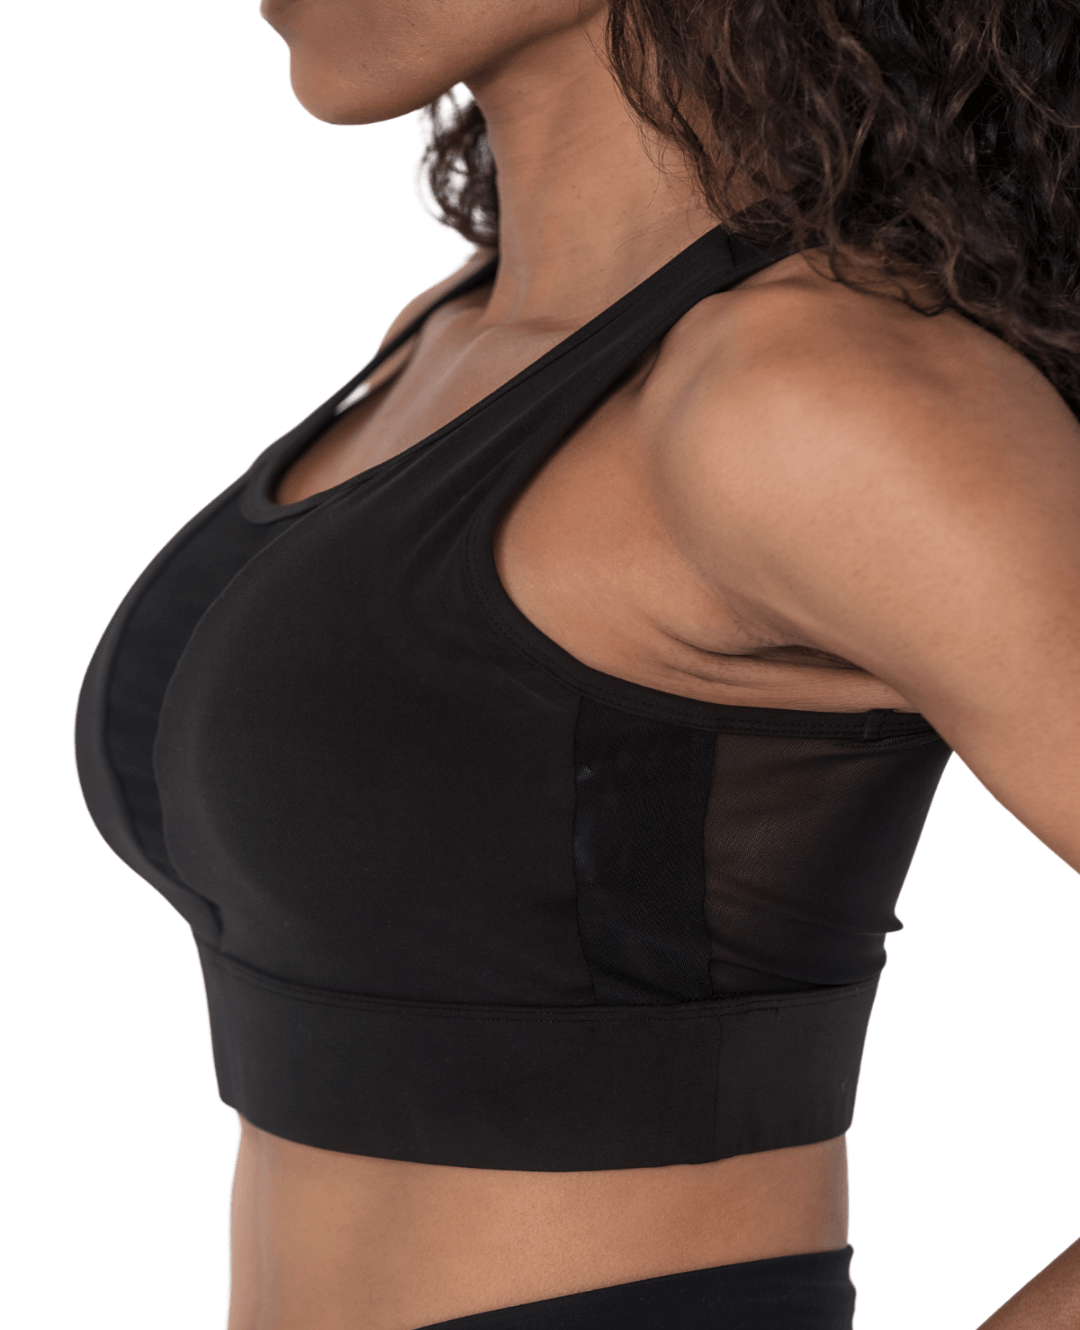 Womens Yoga Plain Black Sports Bra Shockproof Crop Top For Running,  Fitness, And Quick Dry Wear Solid Color S XXL Sizes Available From  Dianweiliu, $13.27